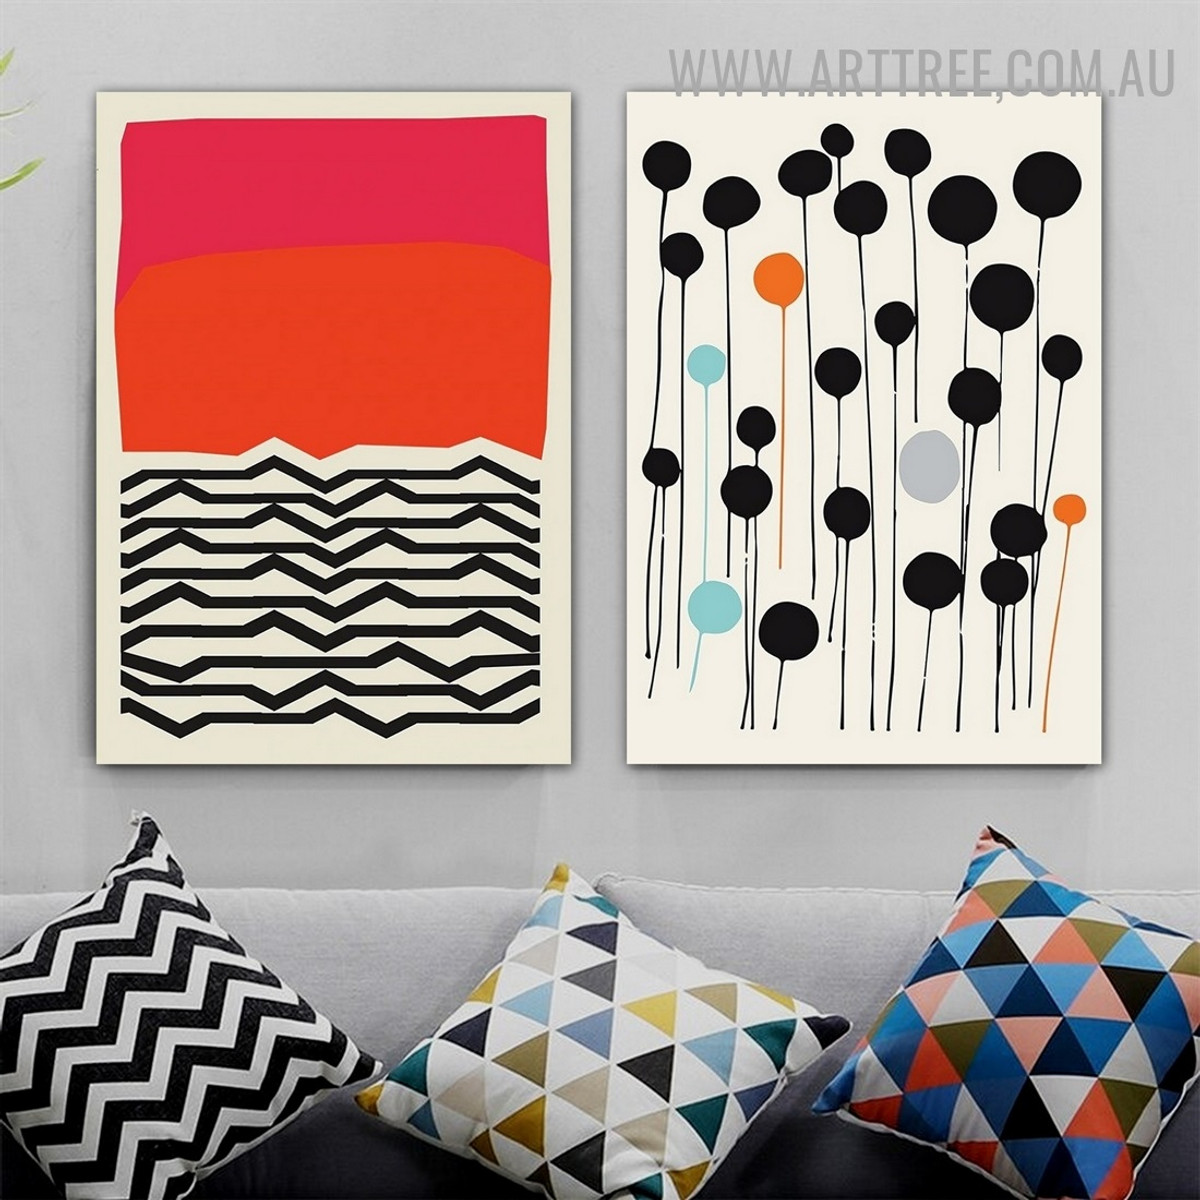 Rectangle Stroke Spots 2 Piece Abstract Modern Geometric Artwork Image Canvas Print for Room Wall Decor